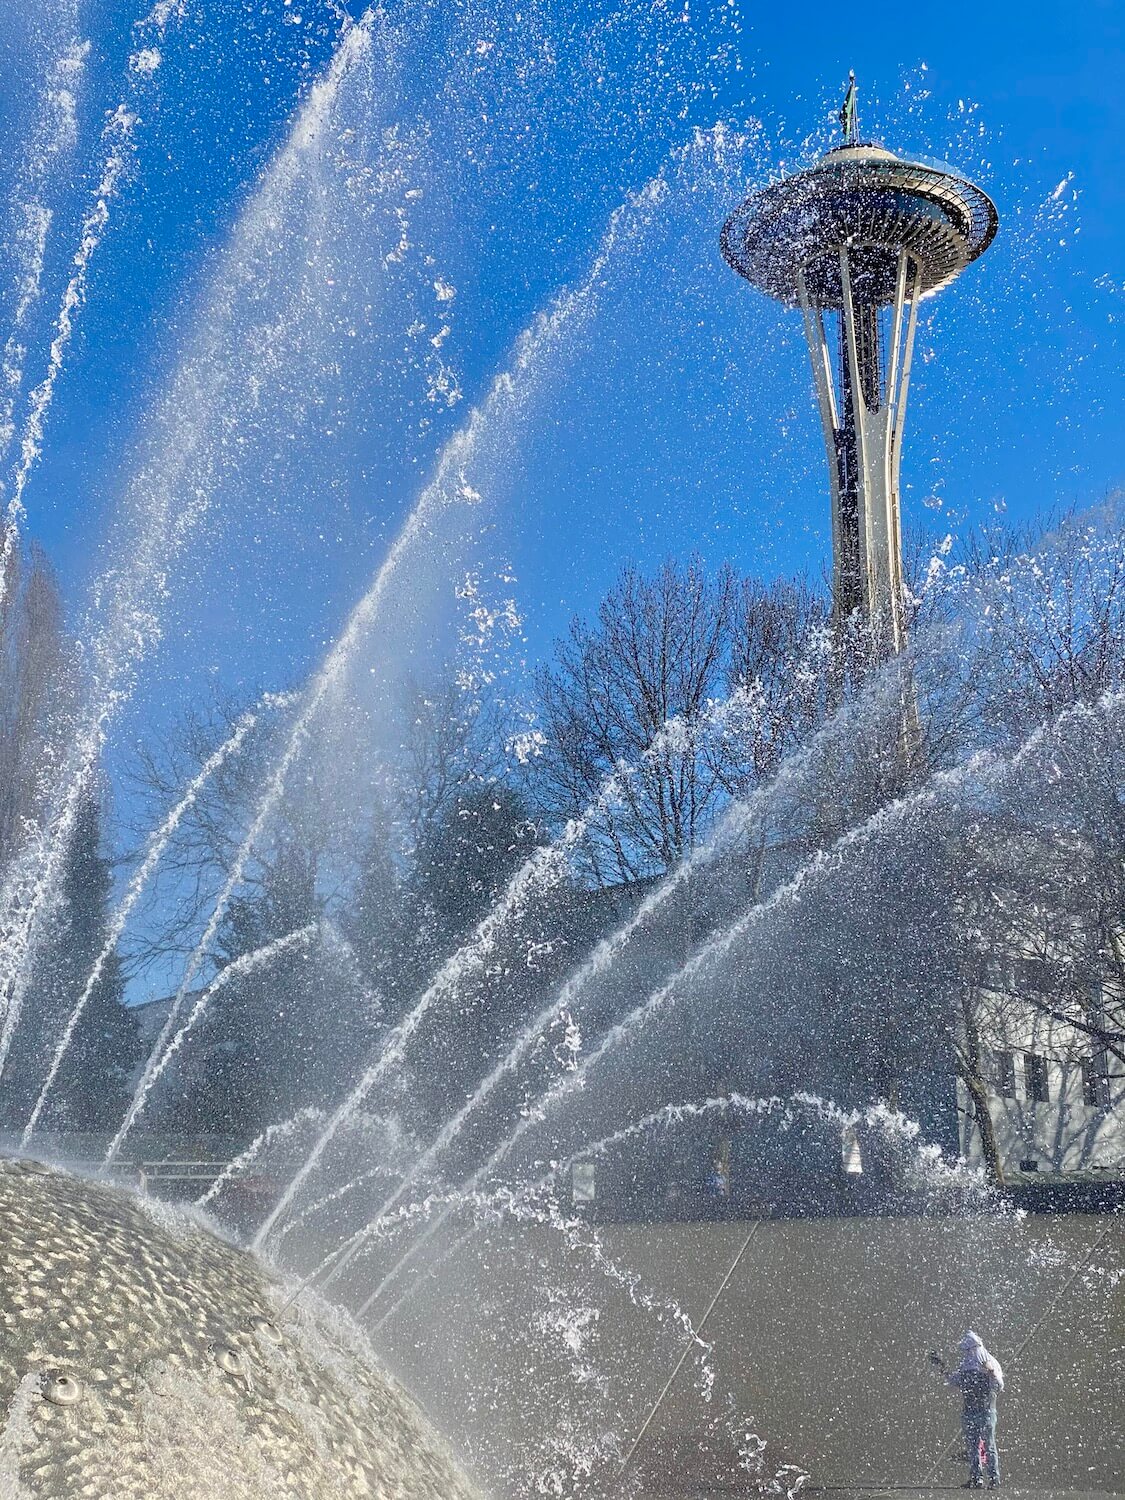 Seattle Center is a fun place to explore when outdoors in the Spring.  Here, the International Fountain sprays multiple streams of water in the air, showing off all the droplets while the proud Space Needle rises above the shot in a blue sky.  